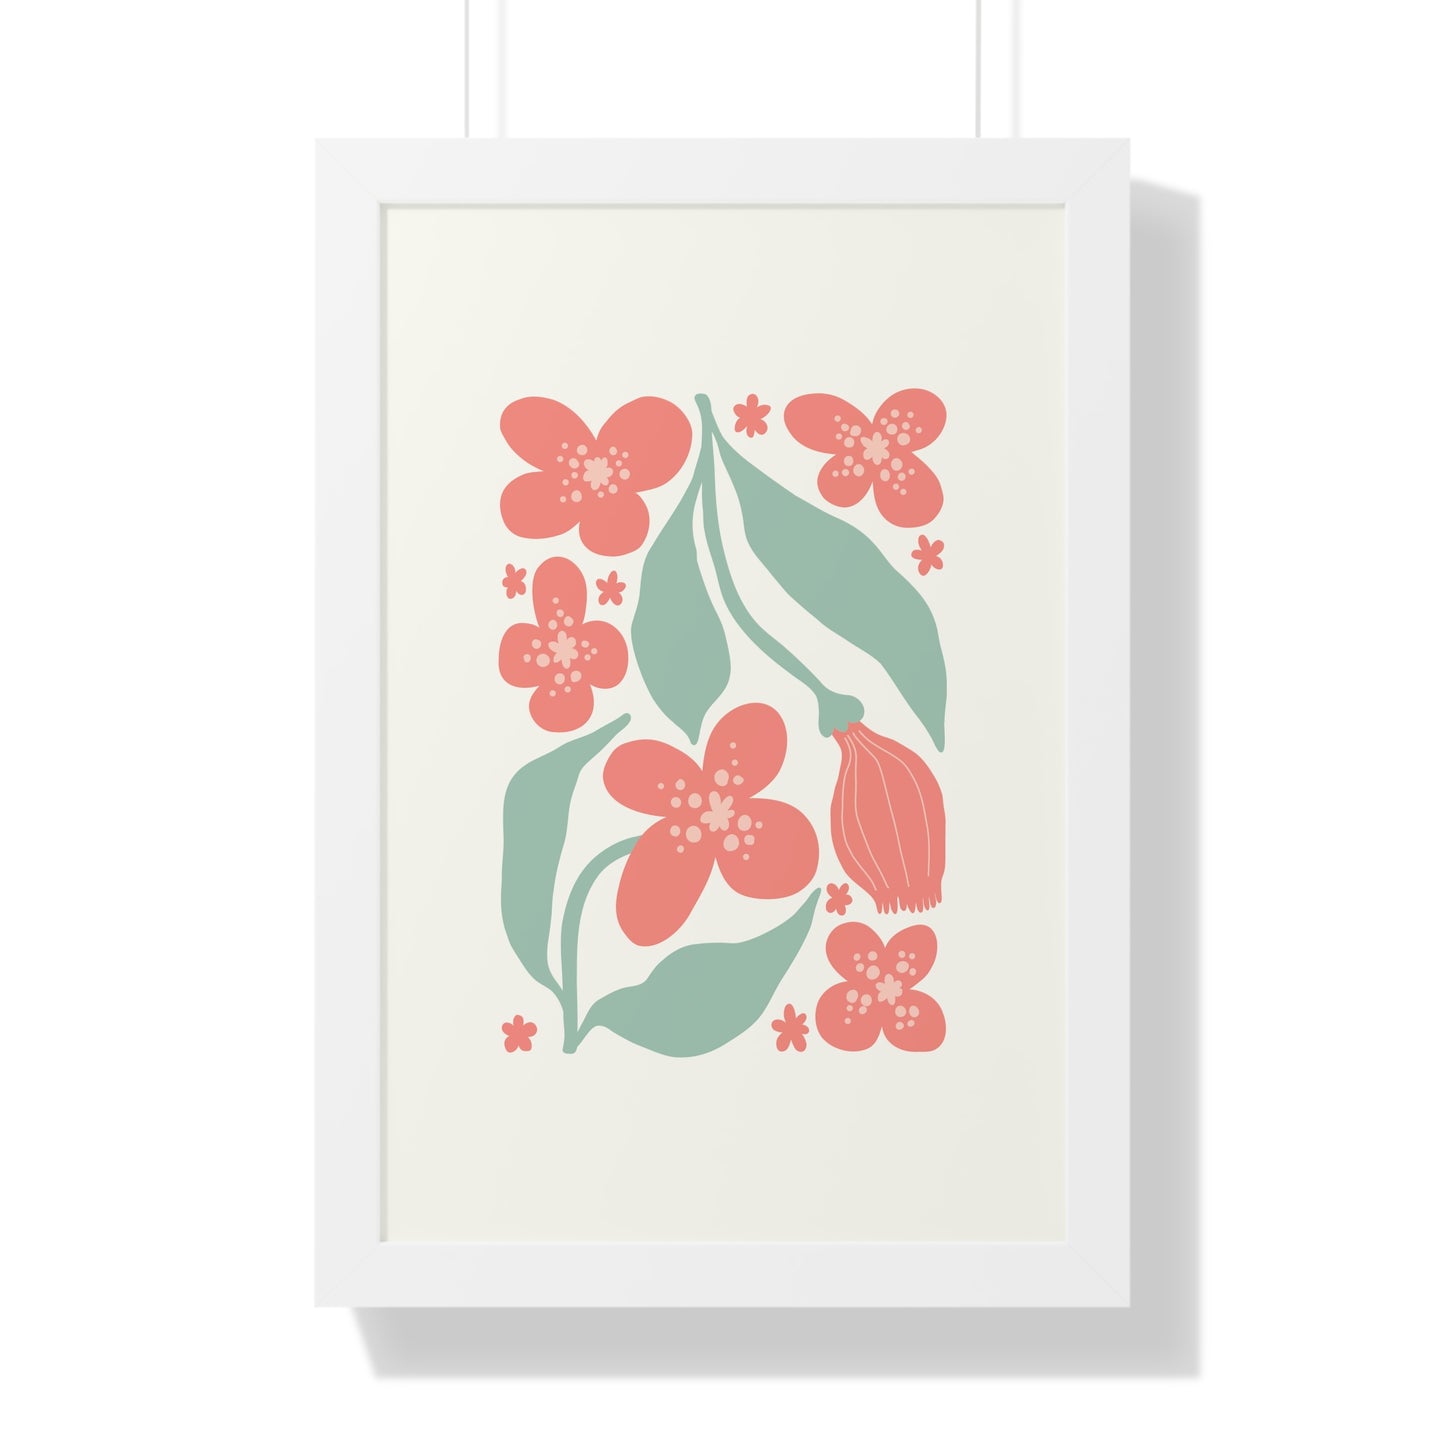 Framed Playful Duo of Blooms Art Wall Poster